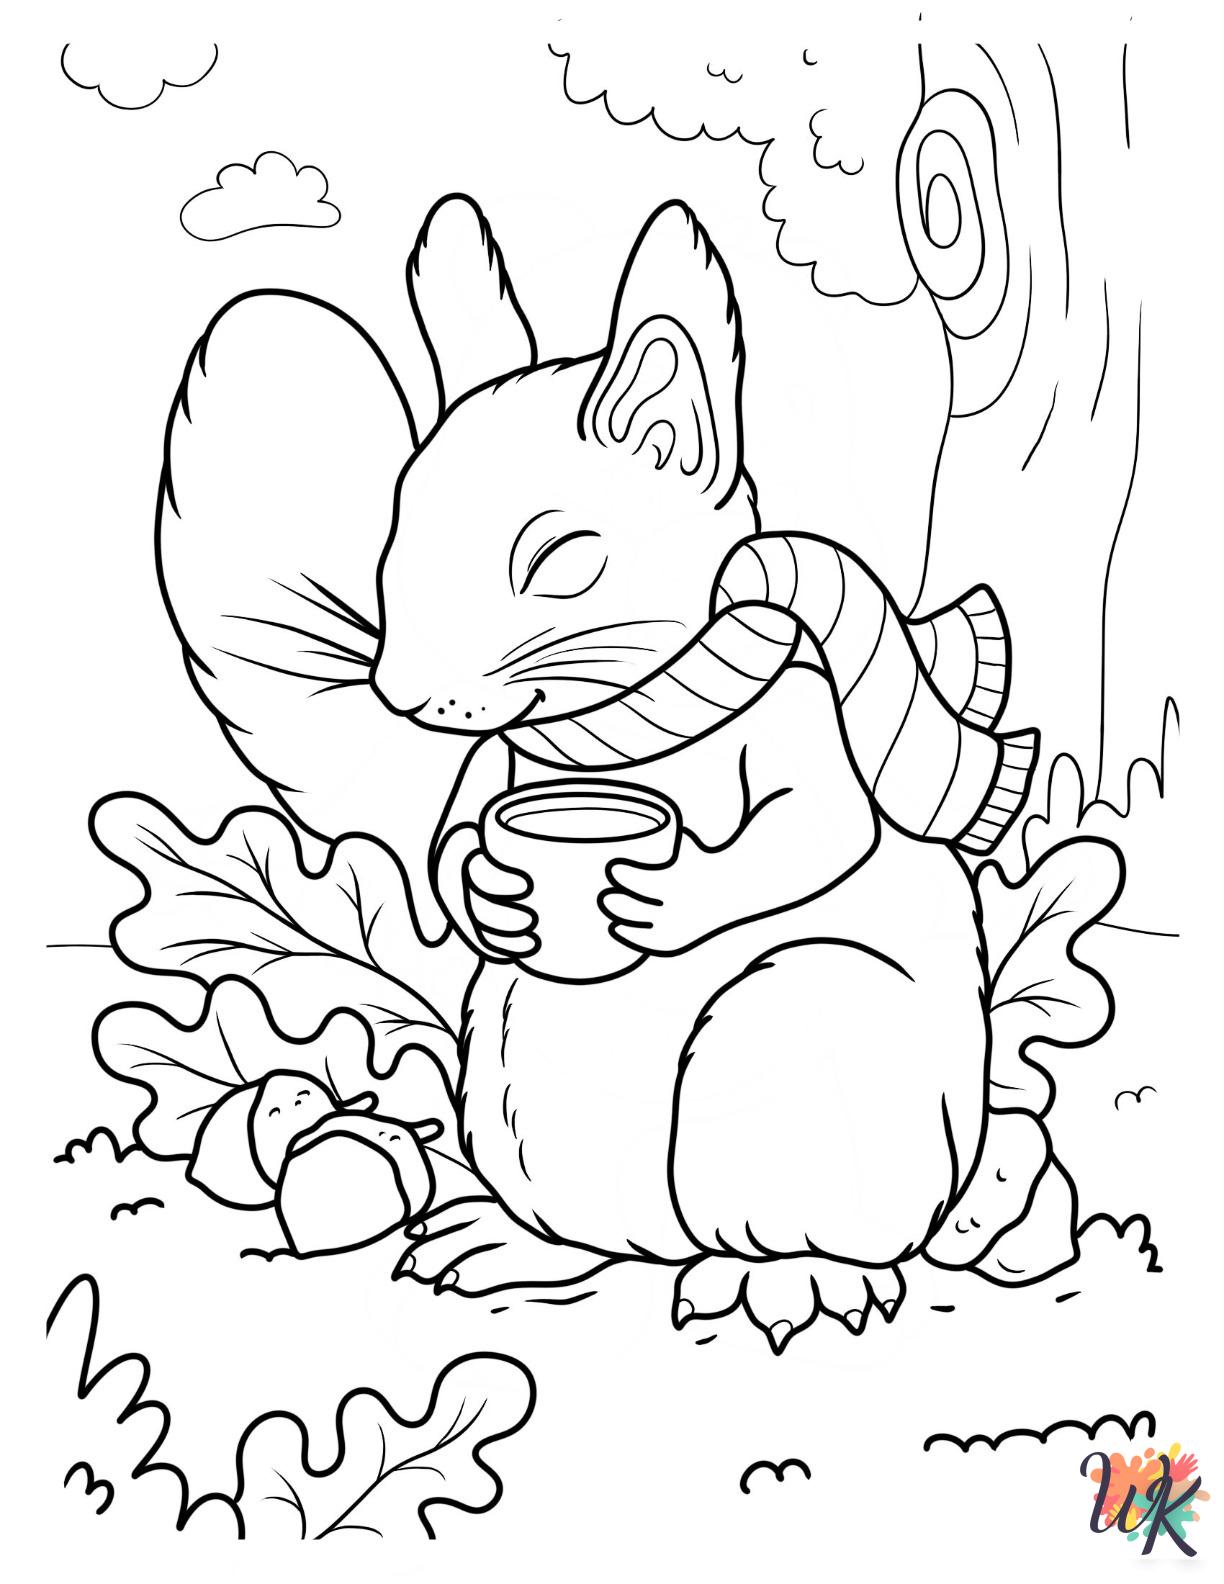 Squirrel printable coloring pages